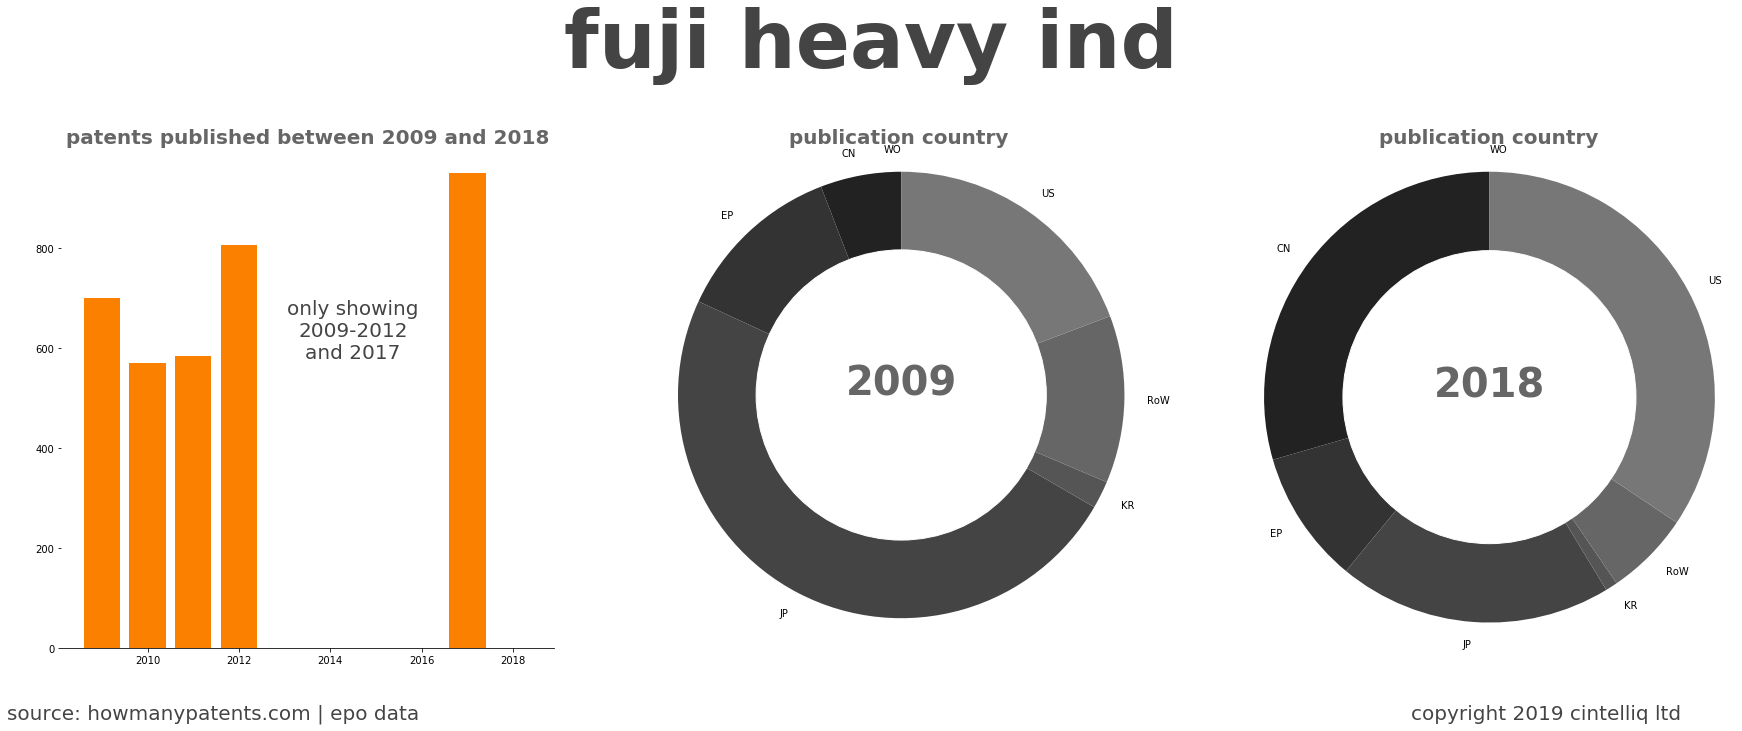 summary of patents for Fuji Heavy Ind